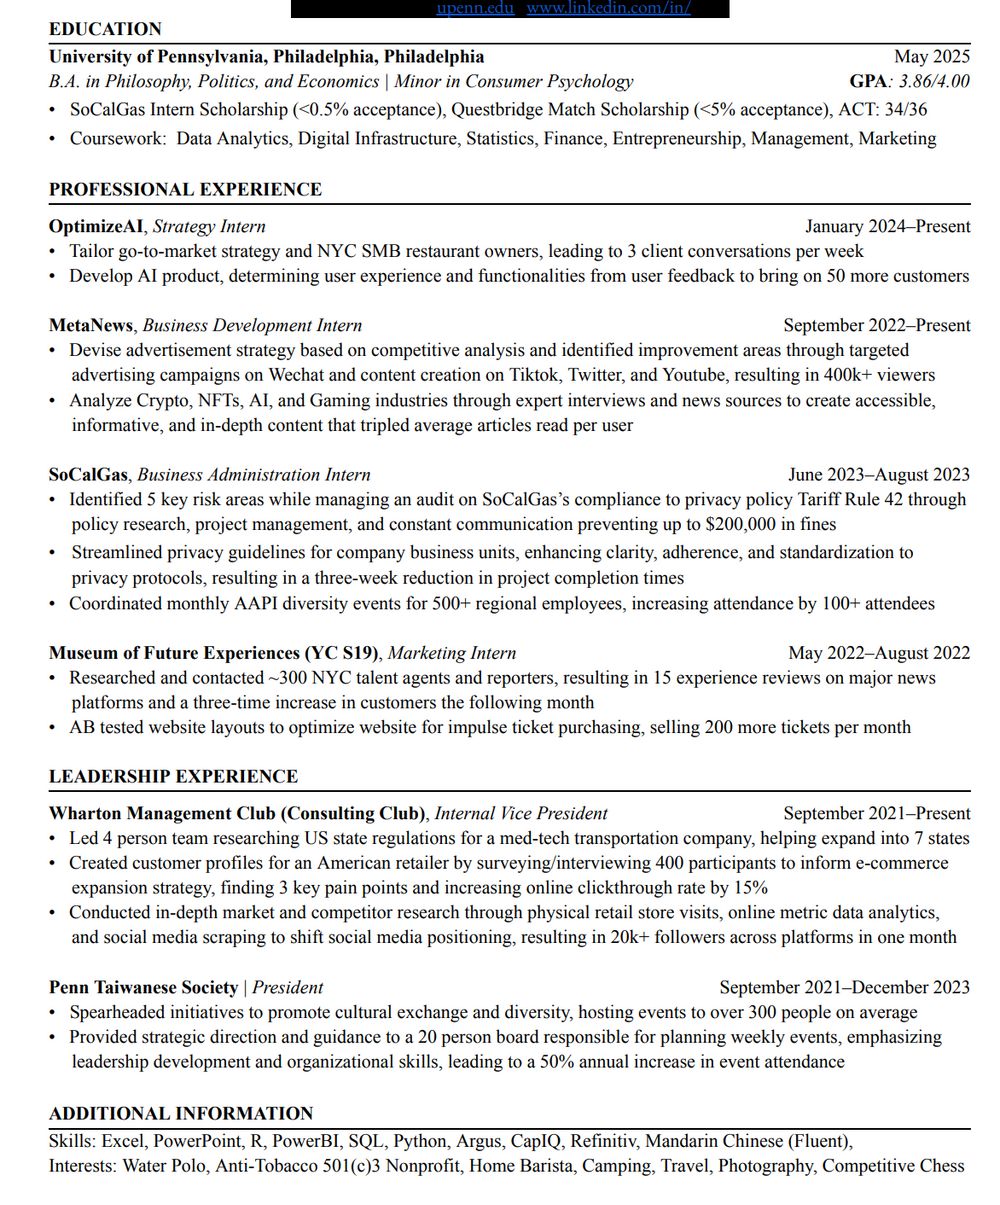 Would appreciate any quick feedback or advice on my resume!